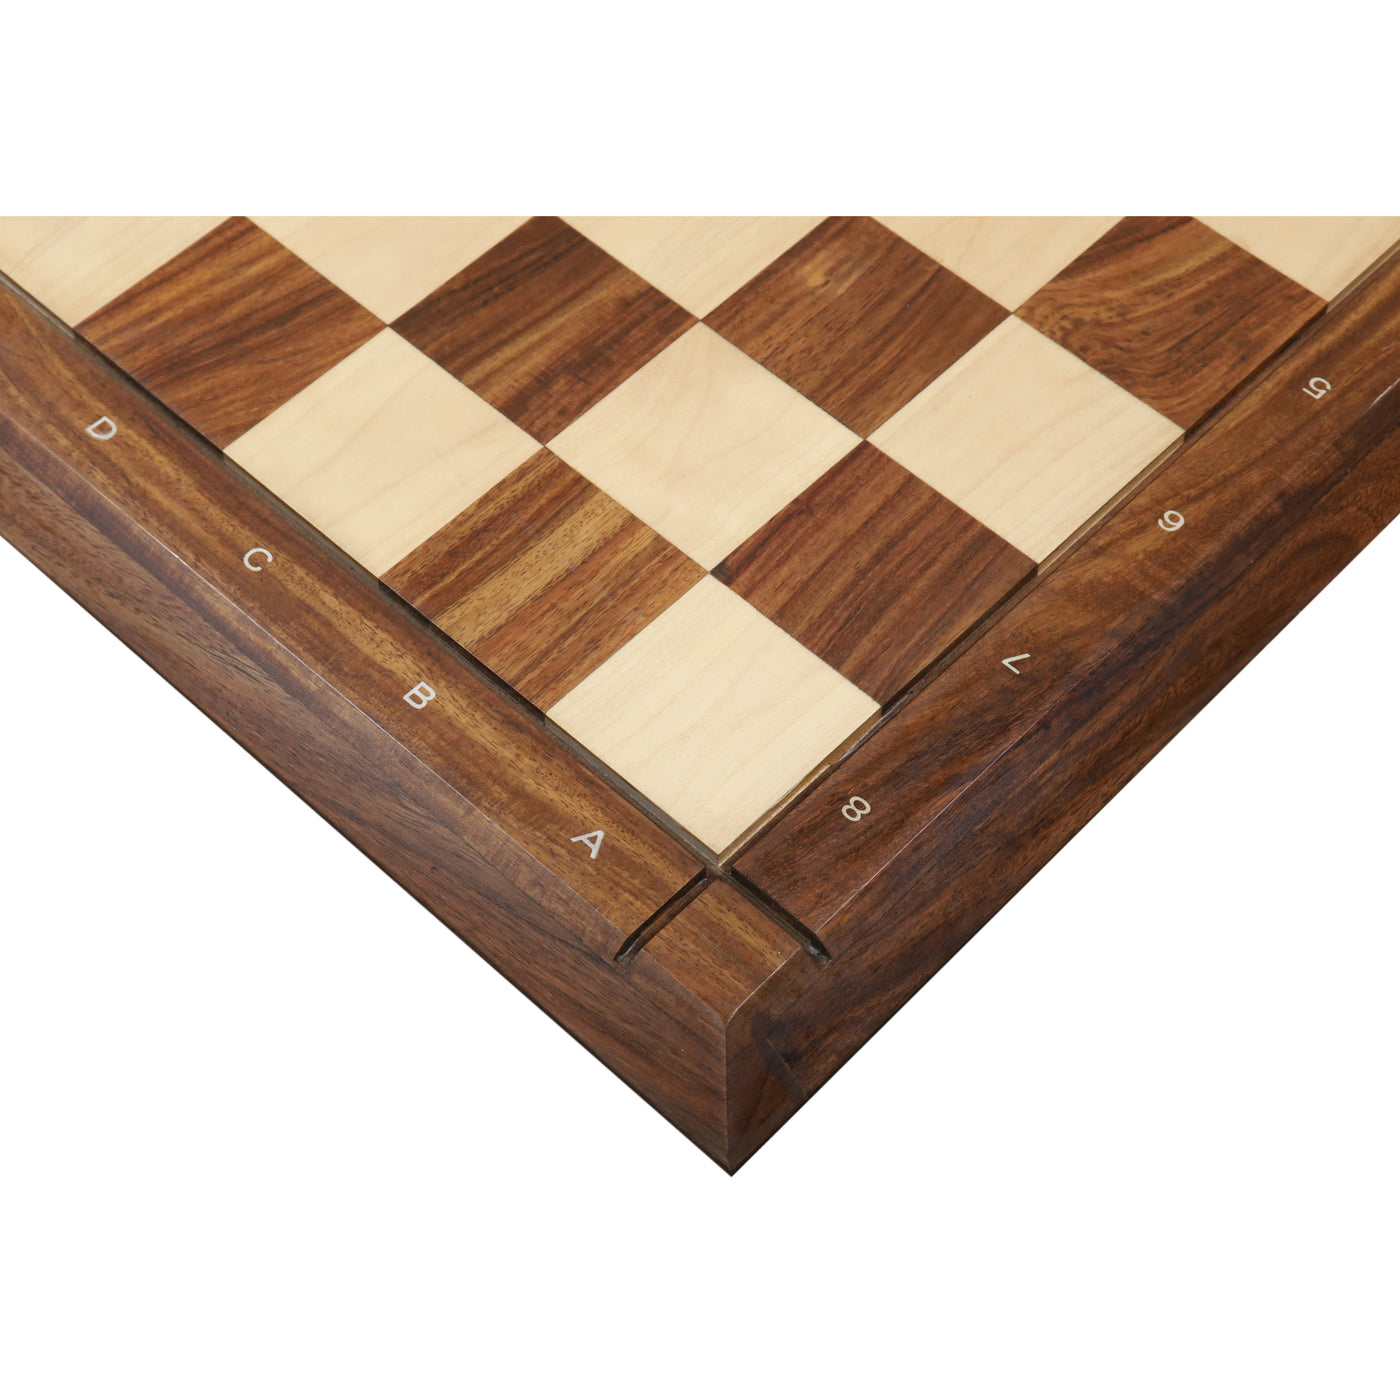  Hand Carved Chess Pieces - Drueke Style Golden Rosewood & Maple Chess board